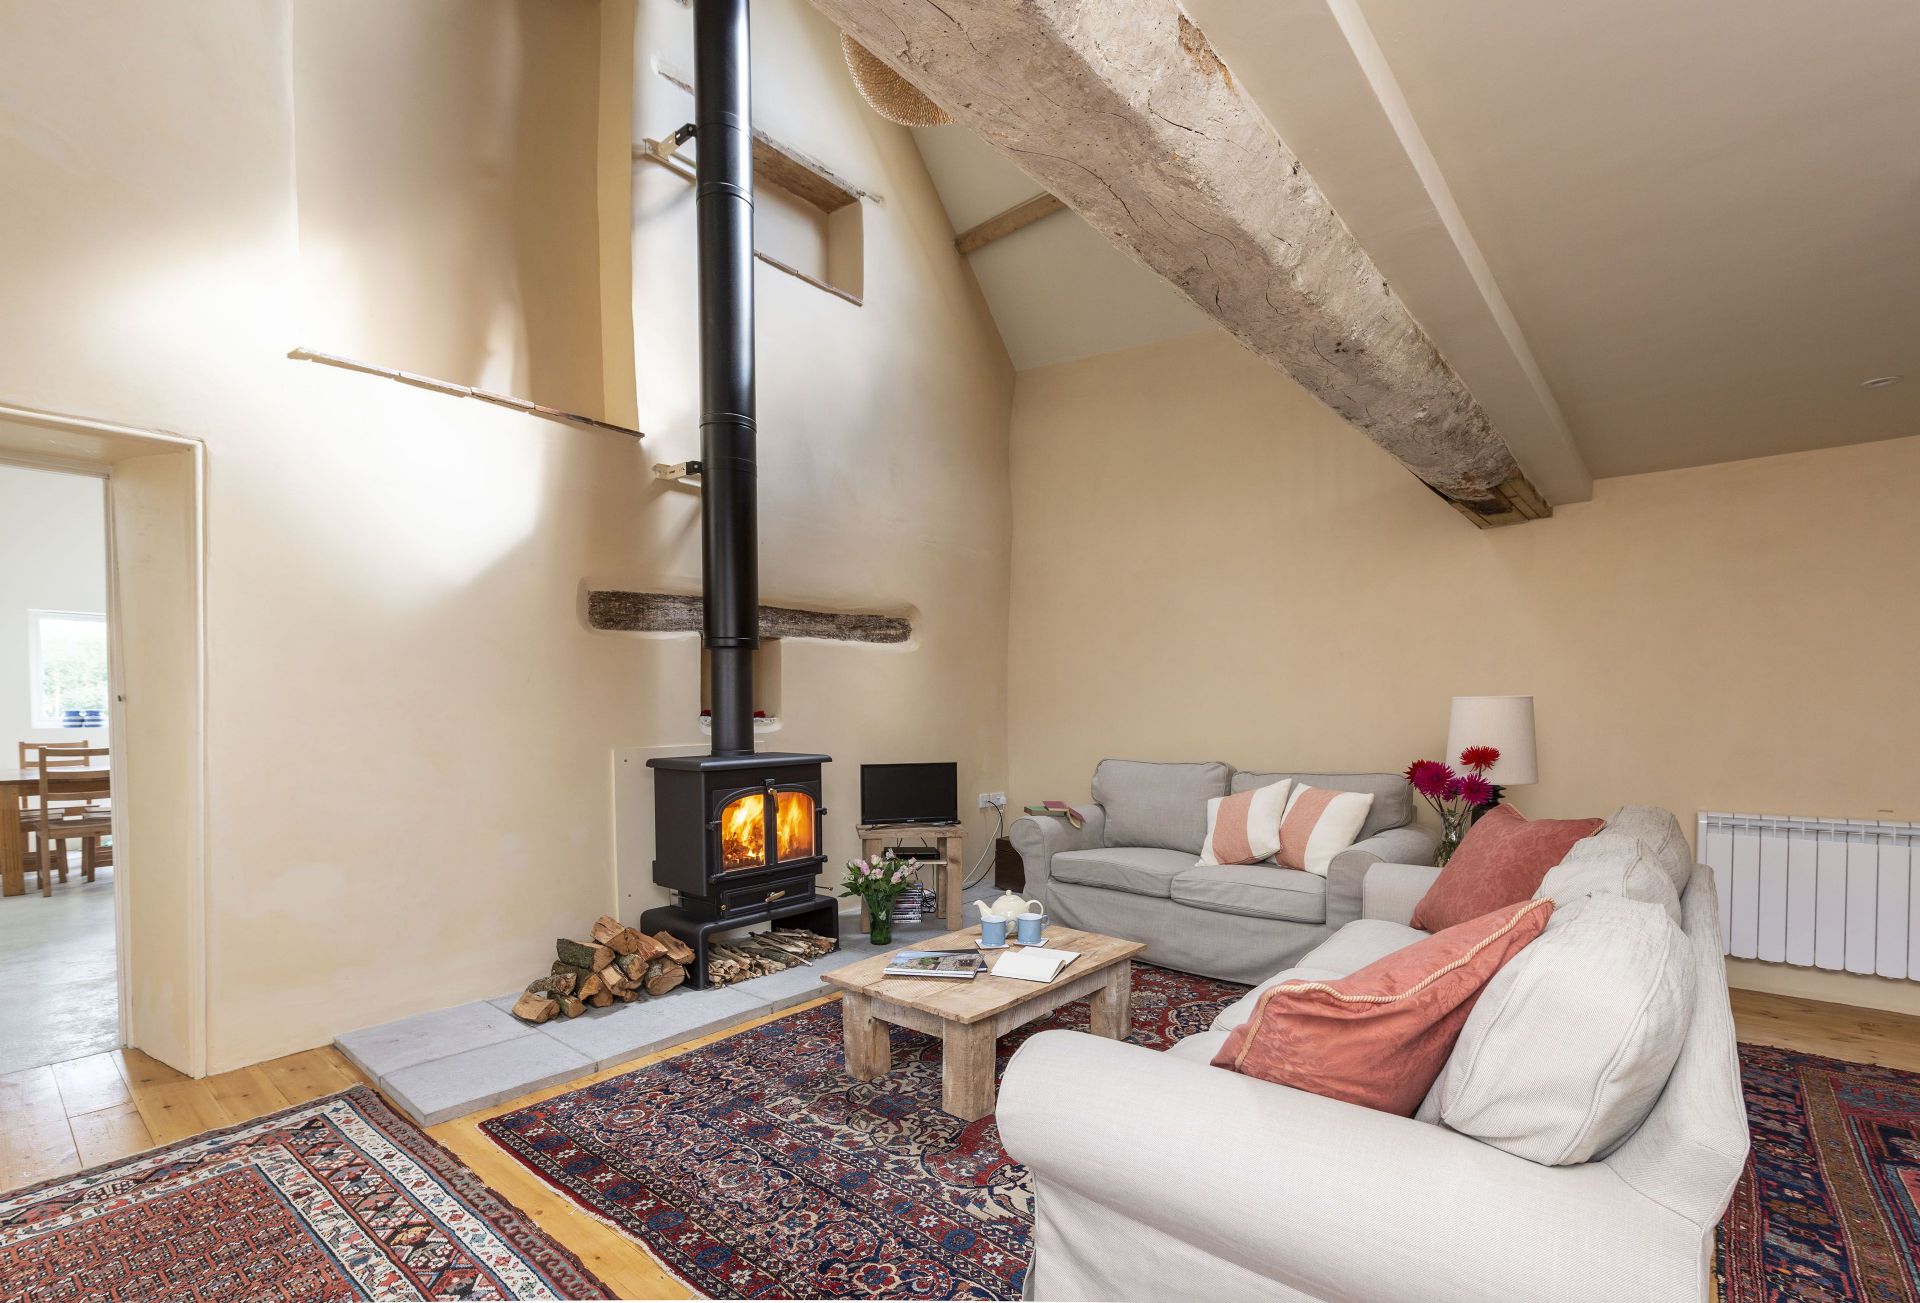 More information about Stable Cottage at Draycott - ideal for a family holiday